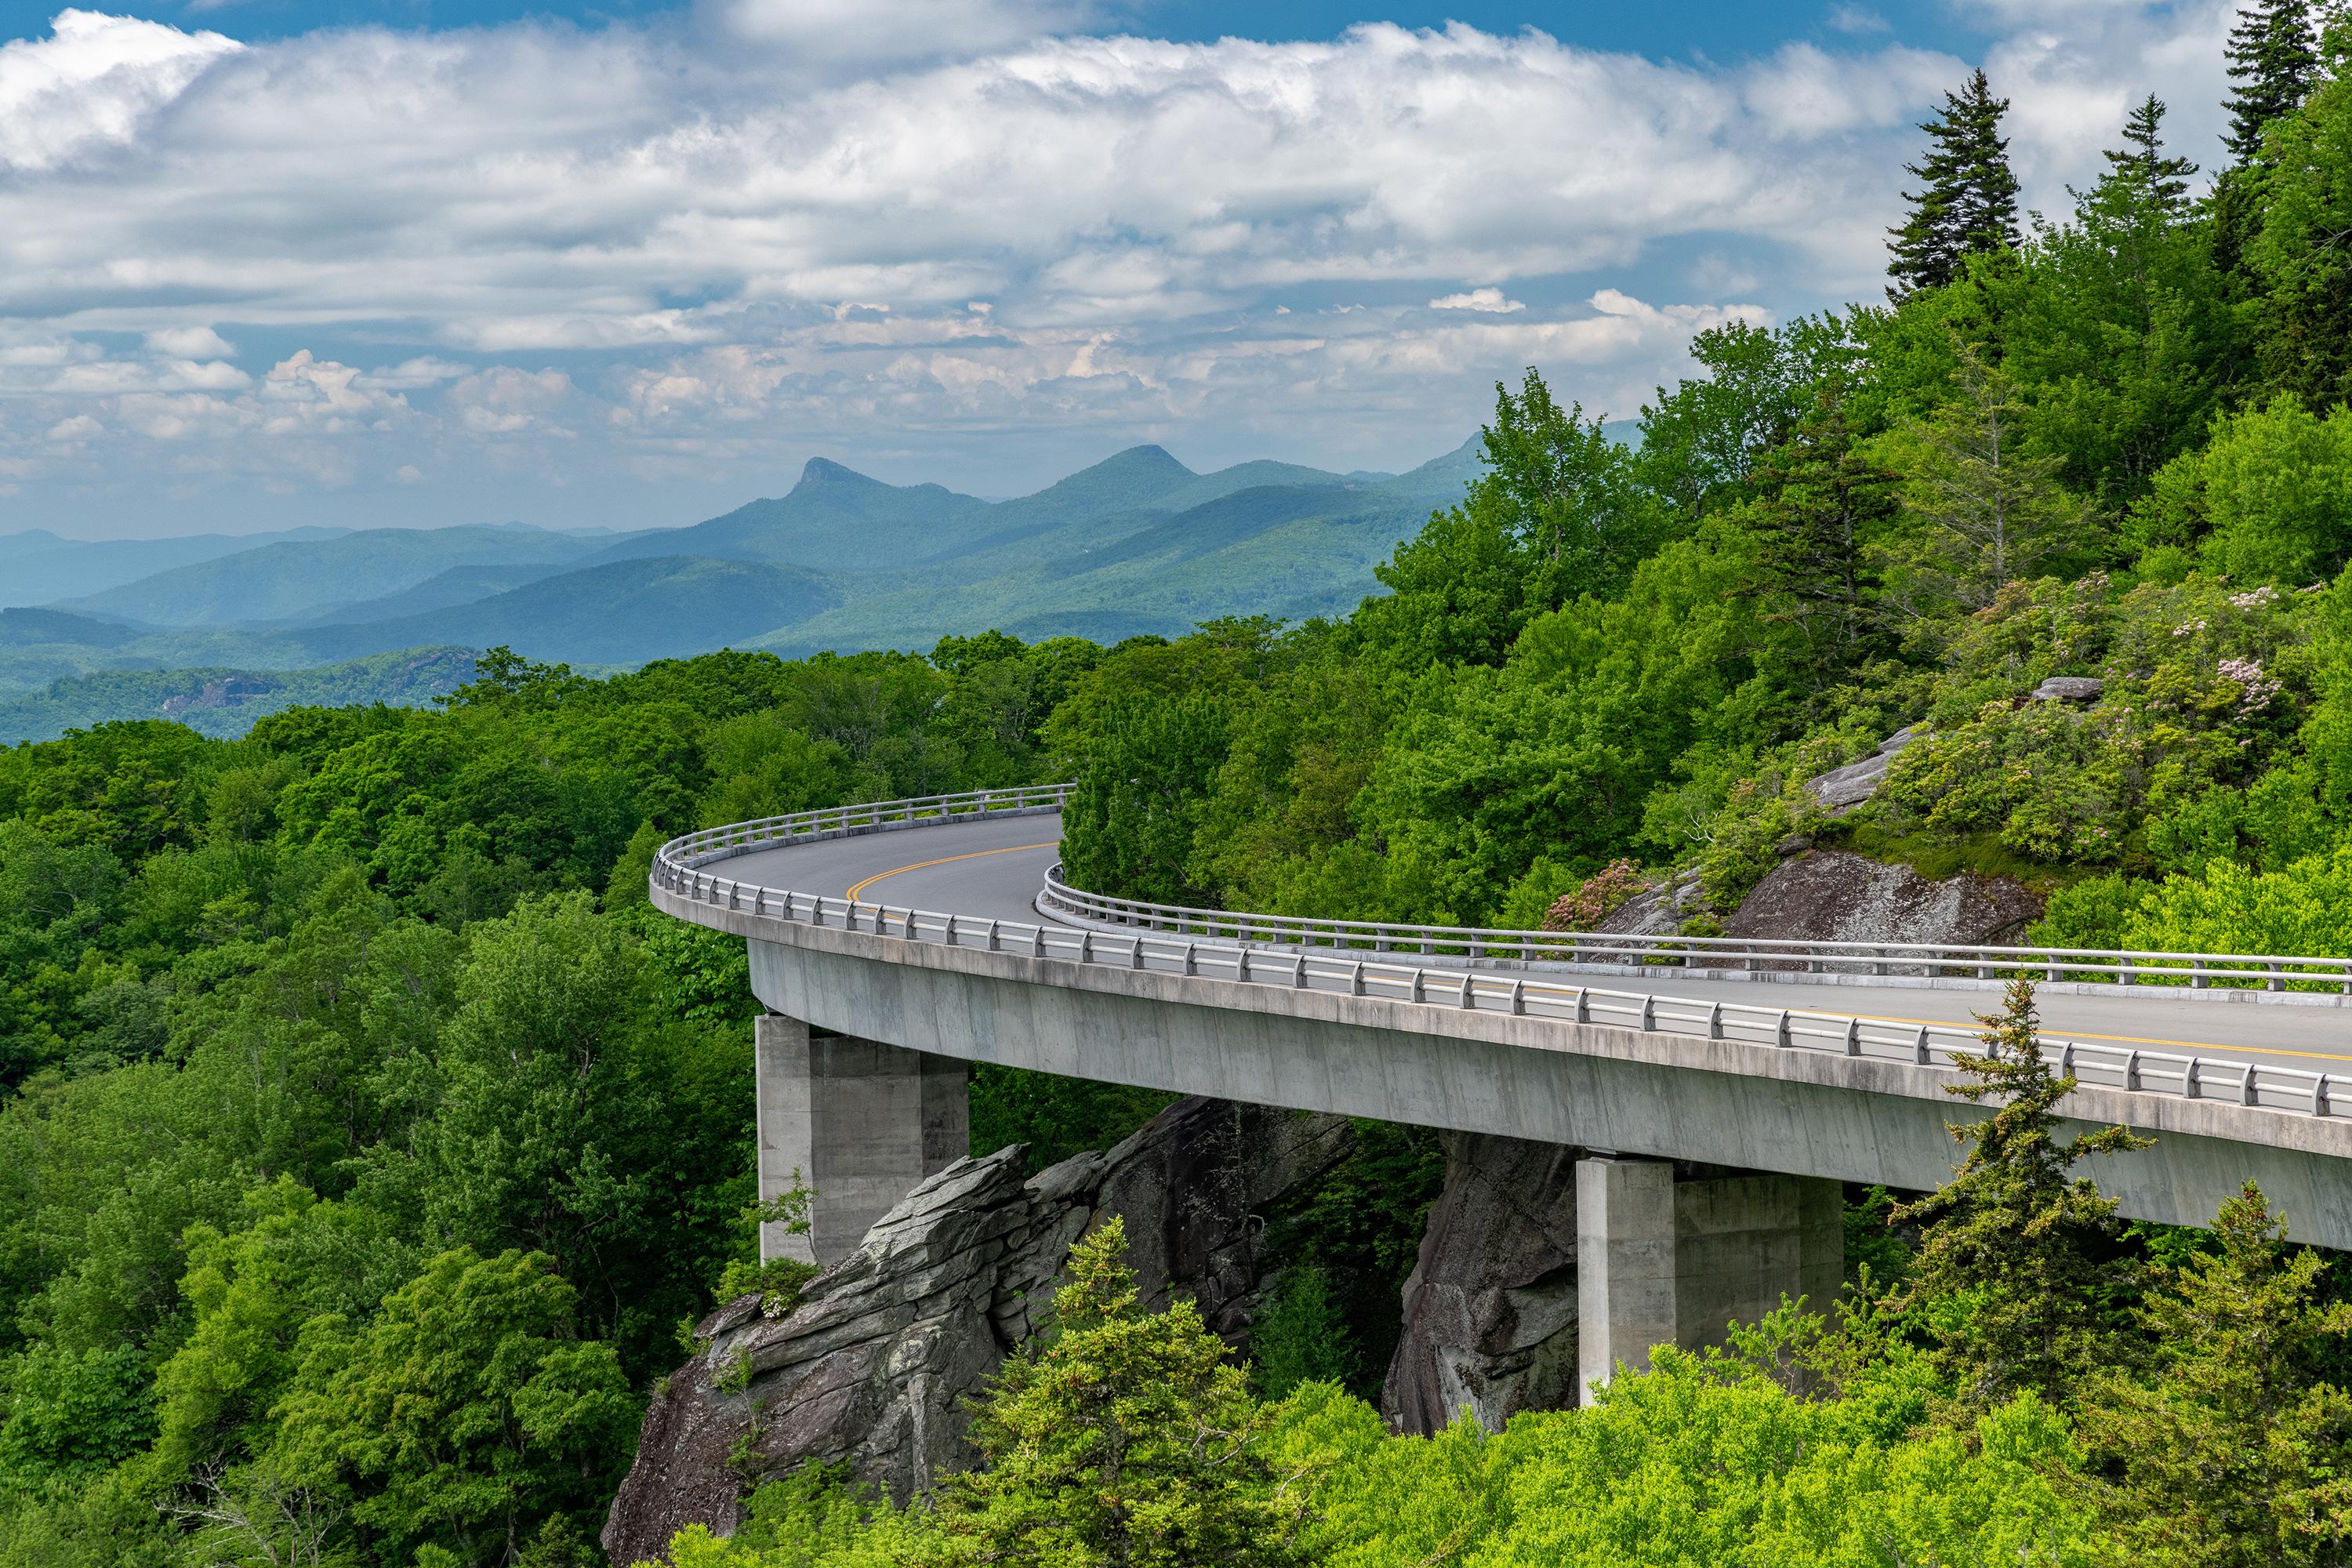 A roadway on piers follows the curve of a mountainside, running toward distant mountains.